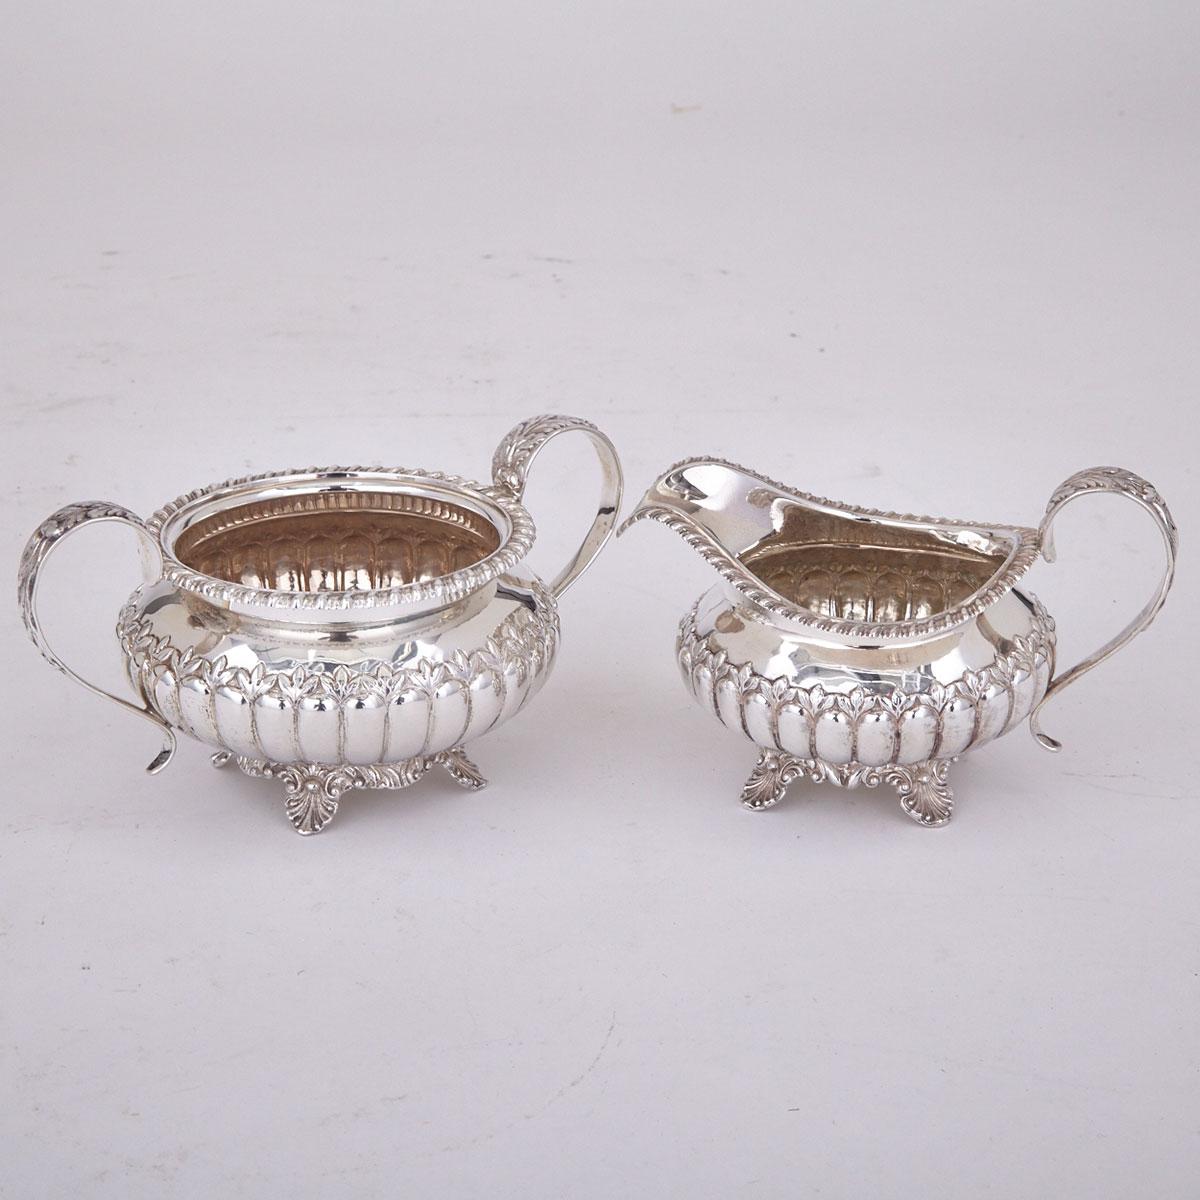 William IV Silver Cream Jug and Later Matching Sugar Basin, London, 1830 and Montreal, 1963